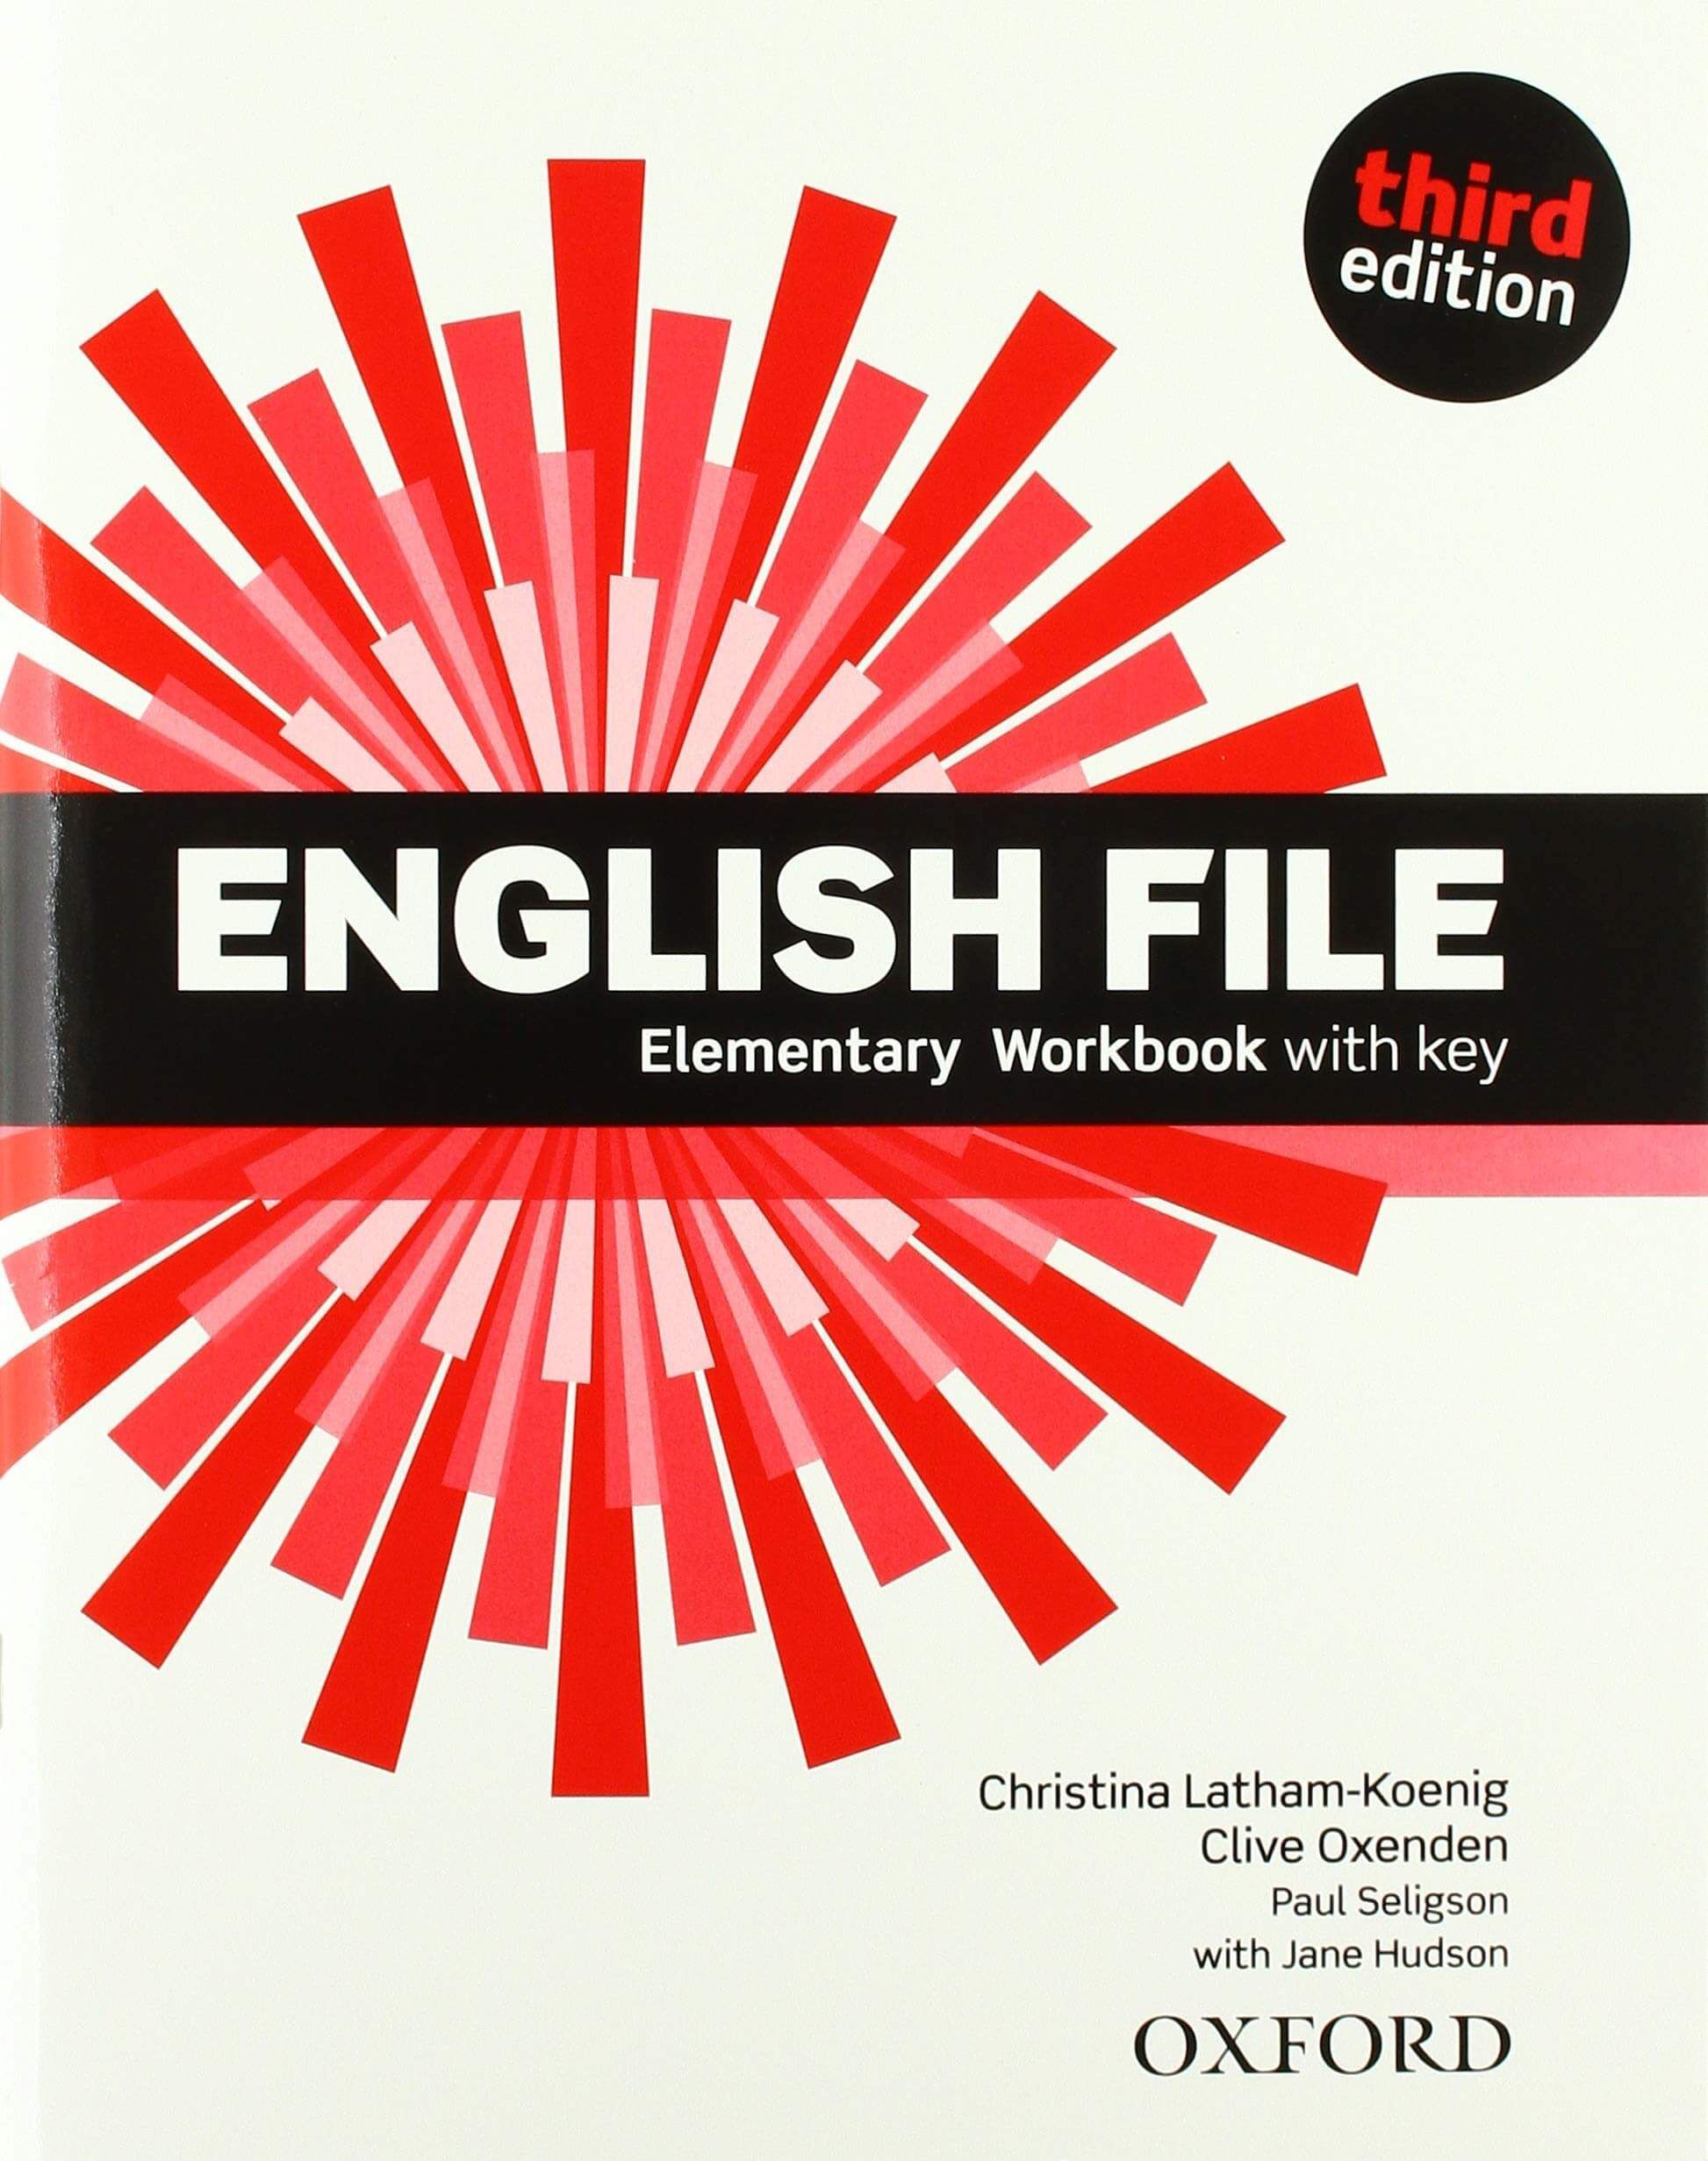 Elementary books oxford. New English file Elementary, Издательство Oxford. Инглиш файл элементари. English file Workbook Clive Oxenden. New English file (Oxford) Intermediate student's book: Clive Oxenden, Christina Latham-Koenig..